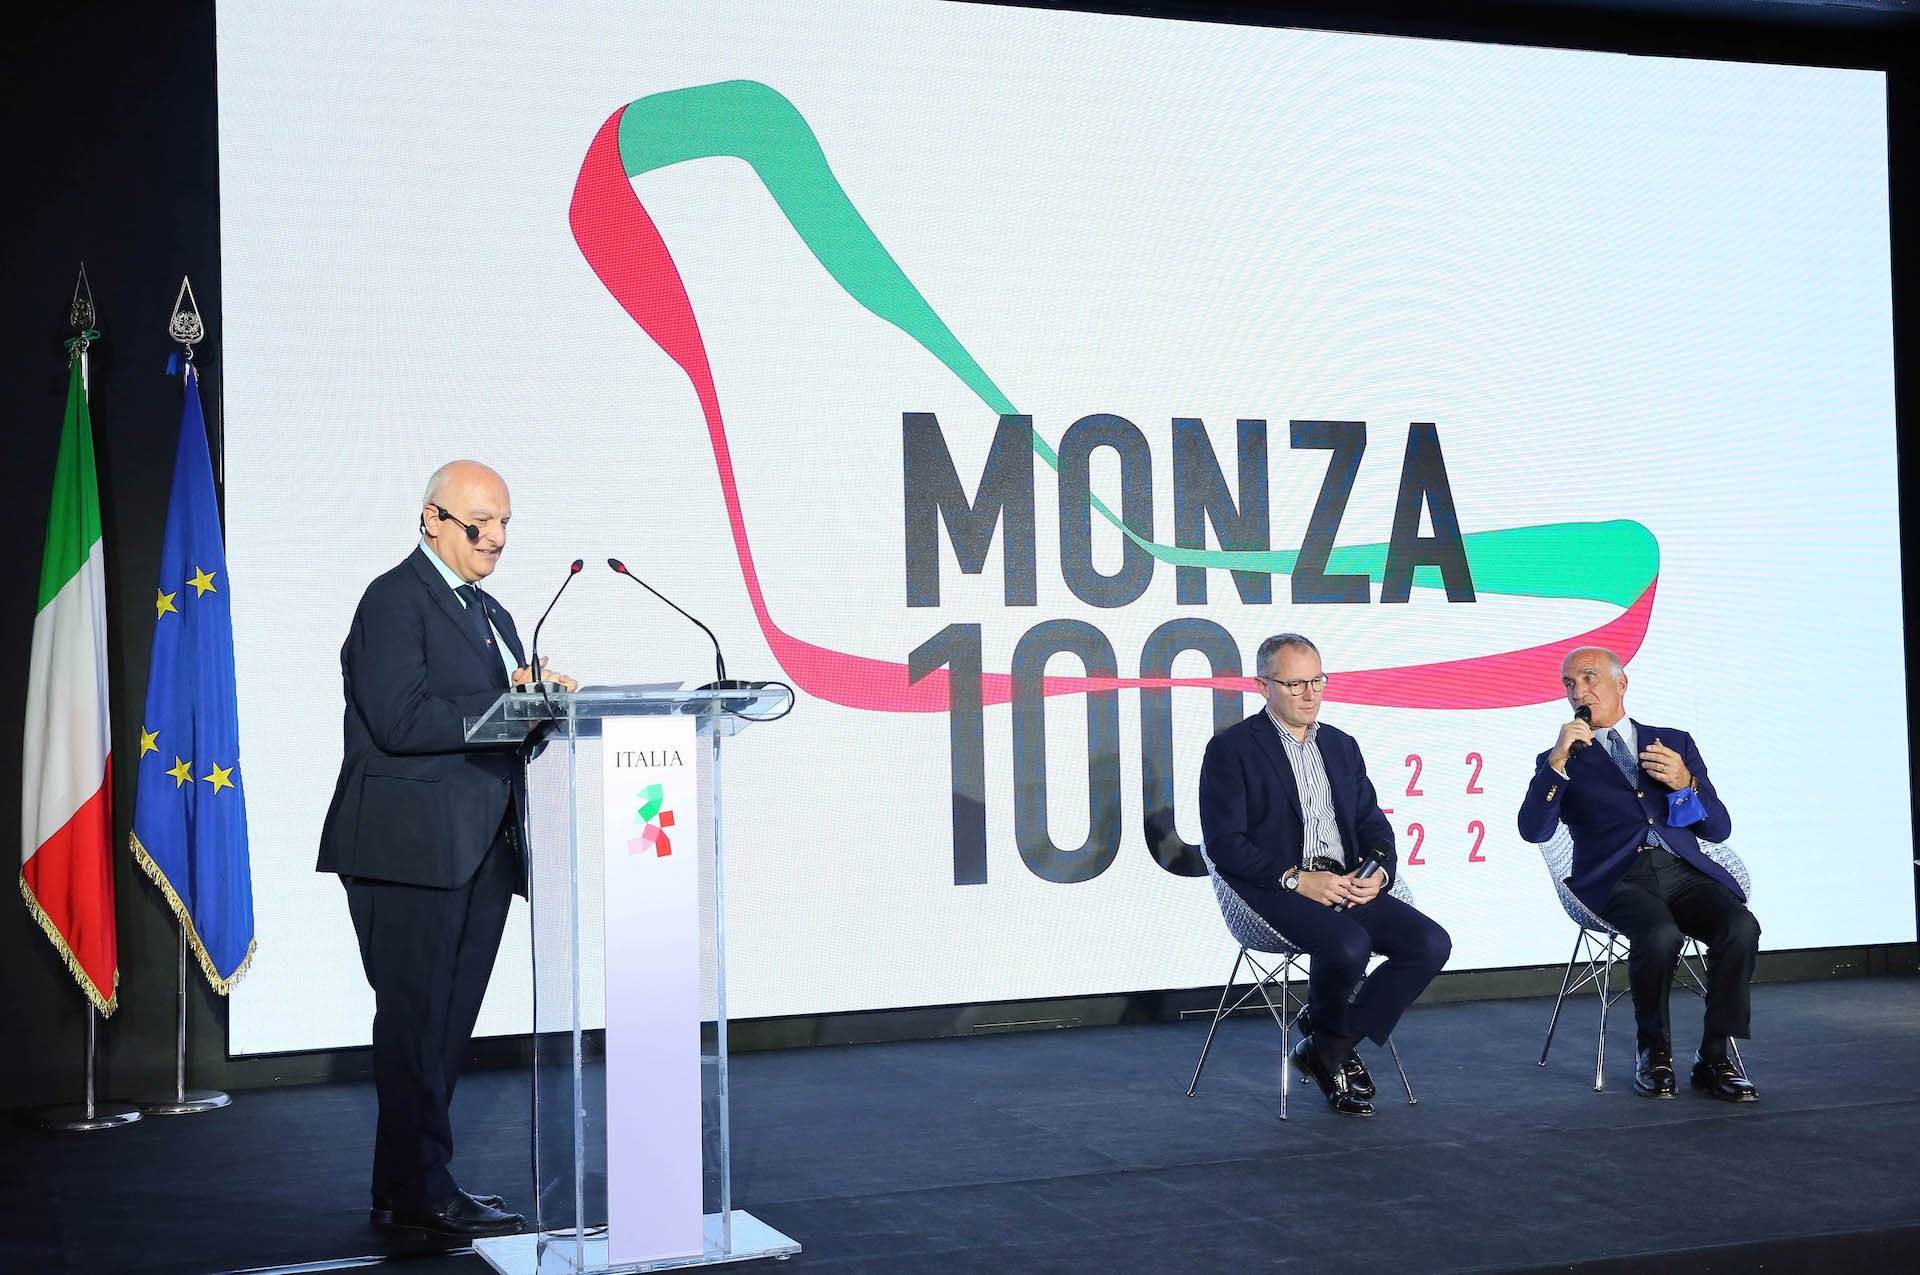 Nazionale Monza F1 Circuit celebrates 100th year at the Italian Pavilion at  Expo 2020 | AutoDrift.ae